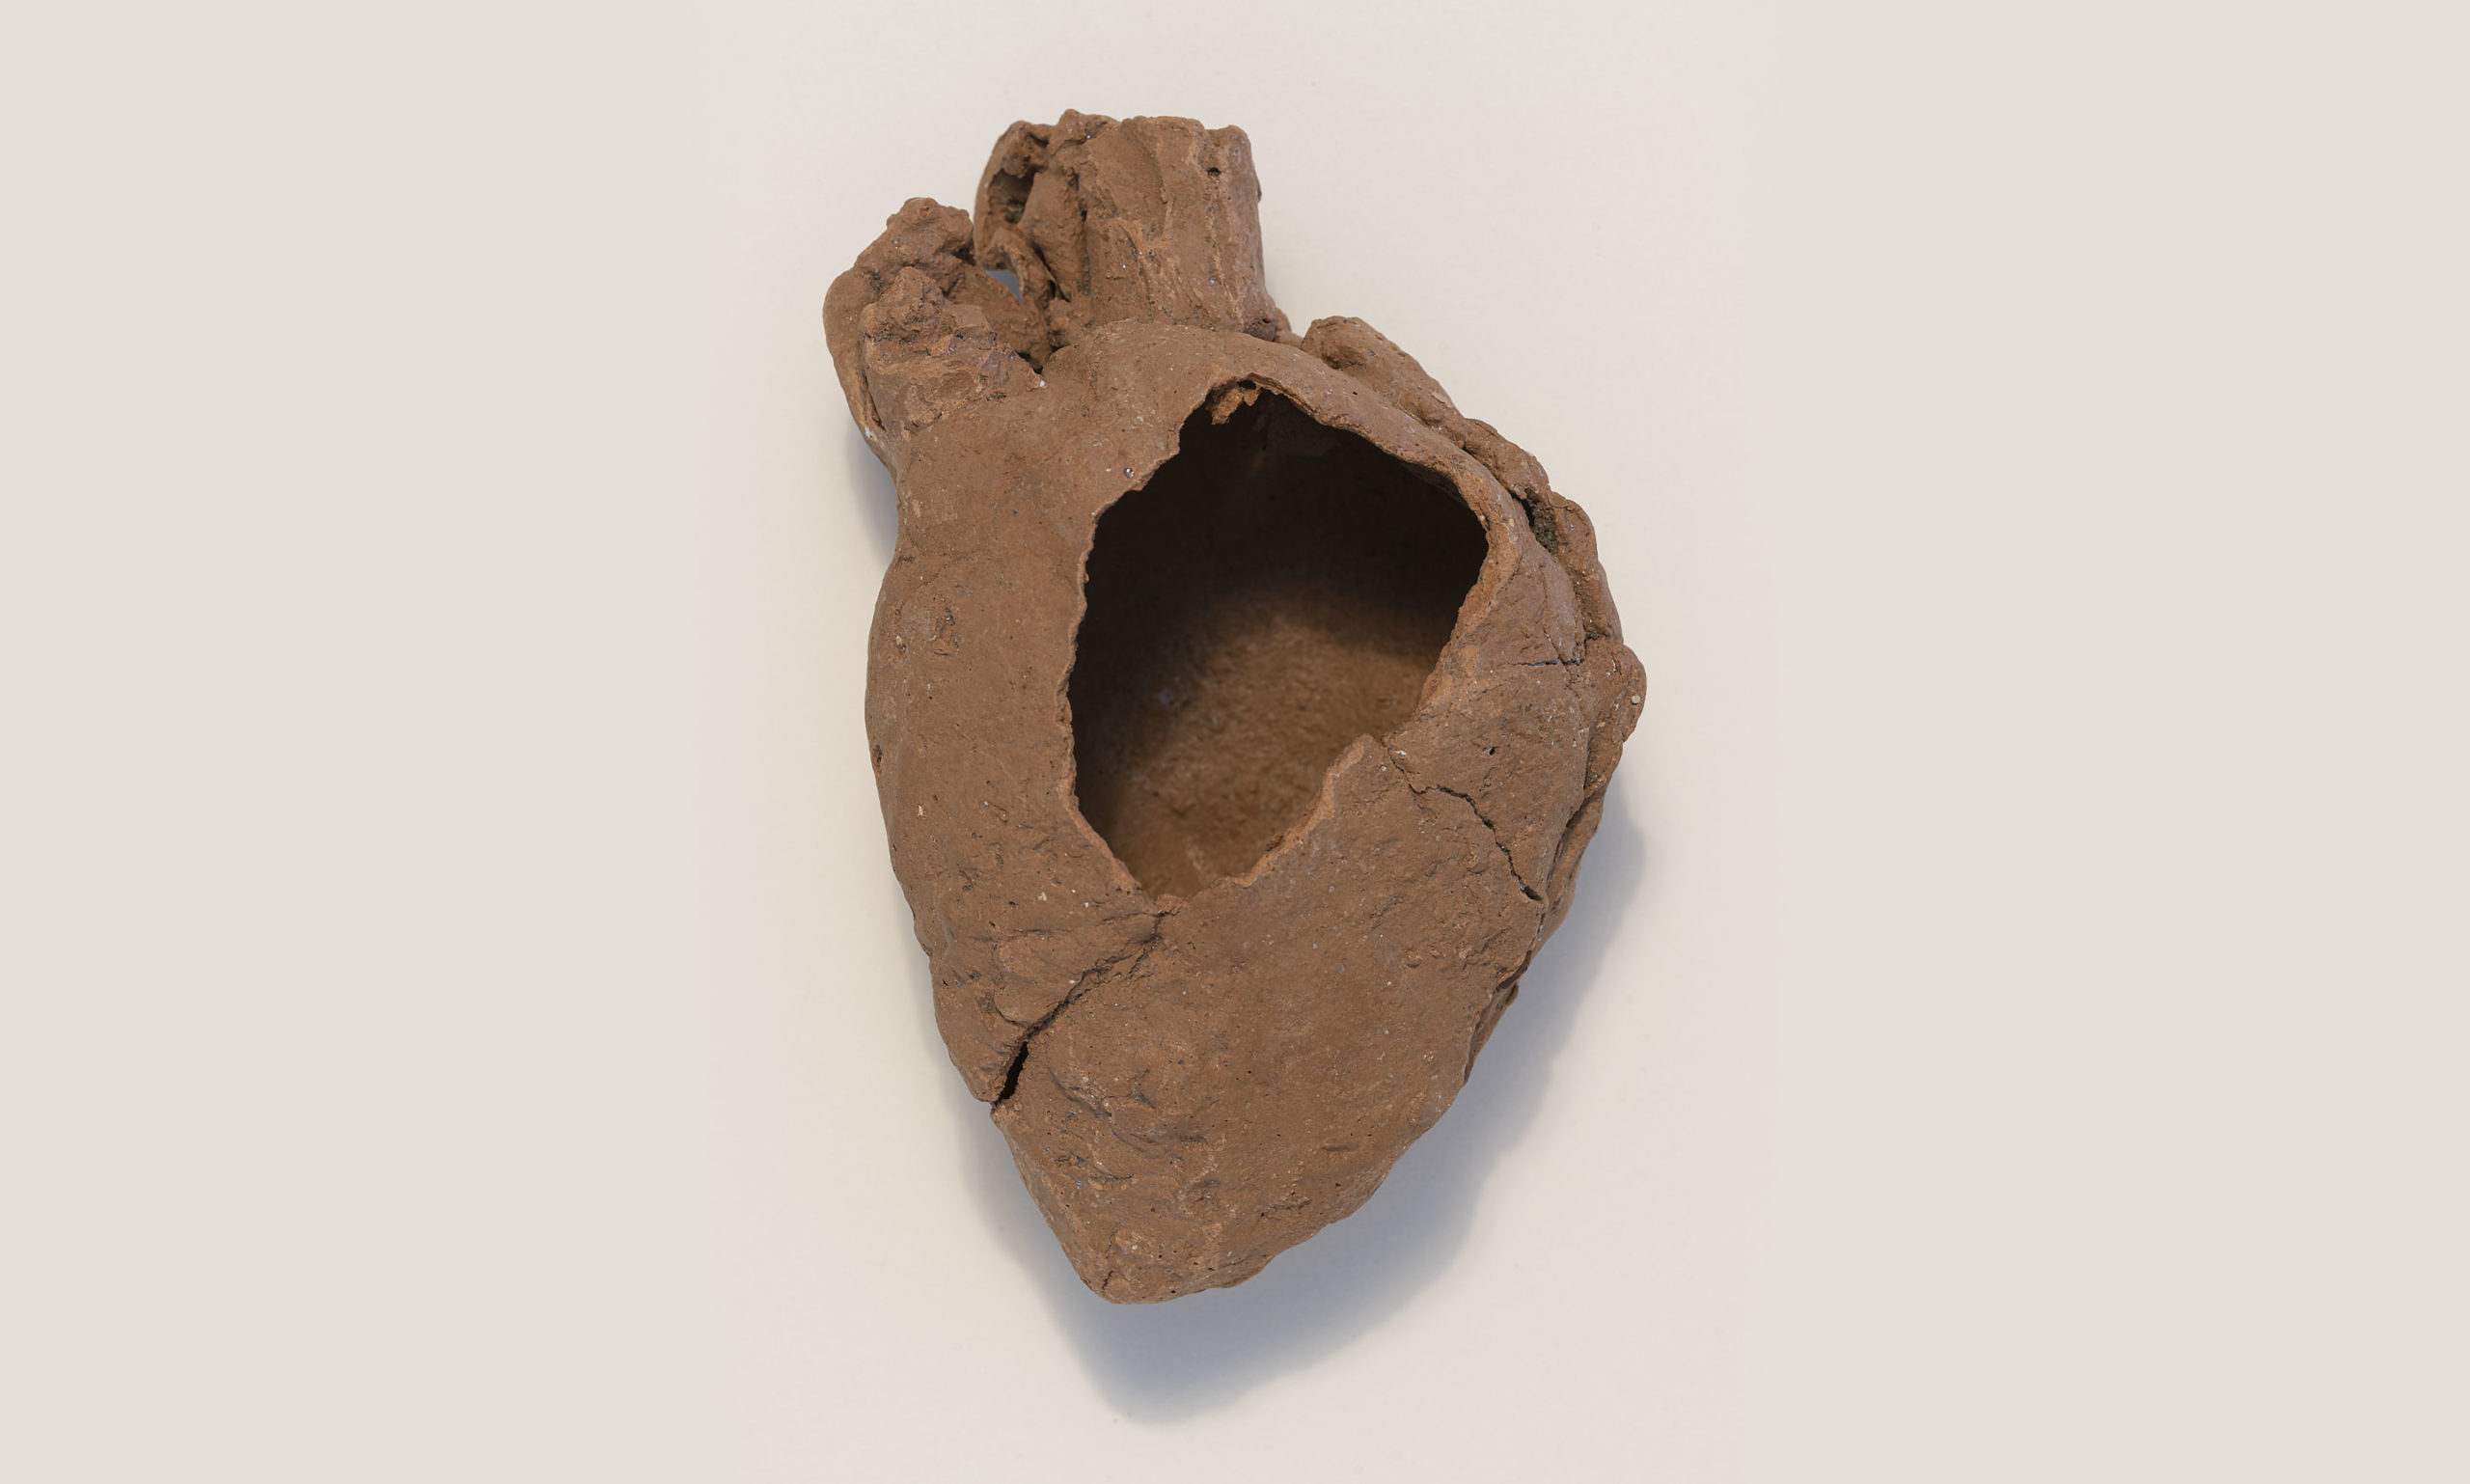 Juan Francisco Elso, Corazon [Heart], 1983-1987. Clay. Courtesy of Rachel Weiss, New York. Photo: Chris Kendall.